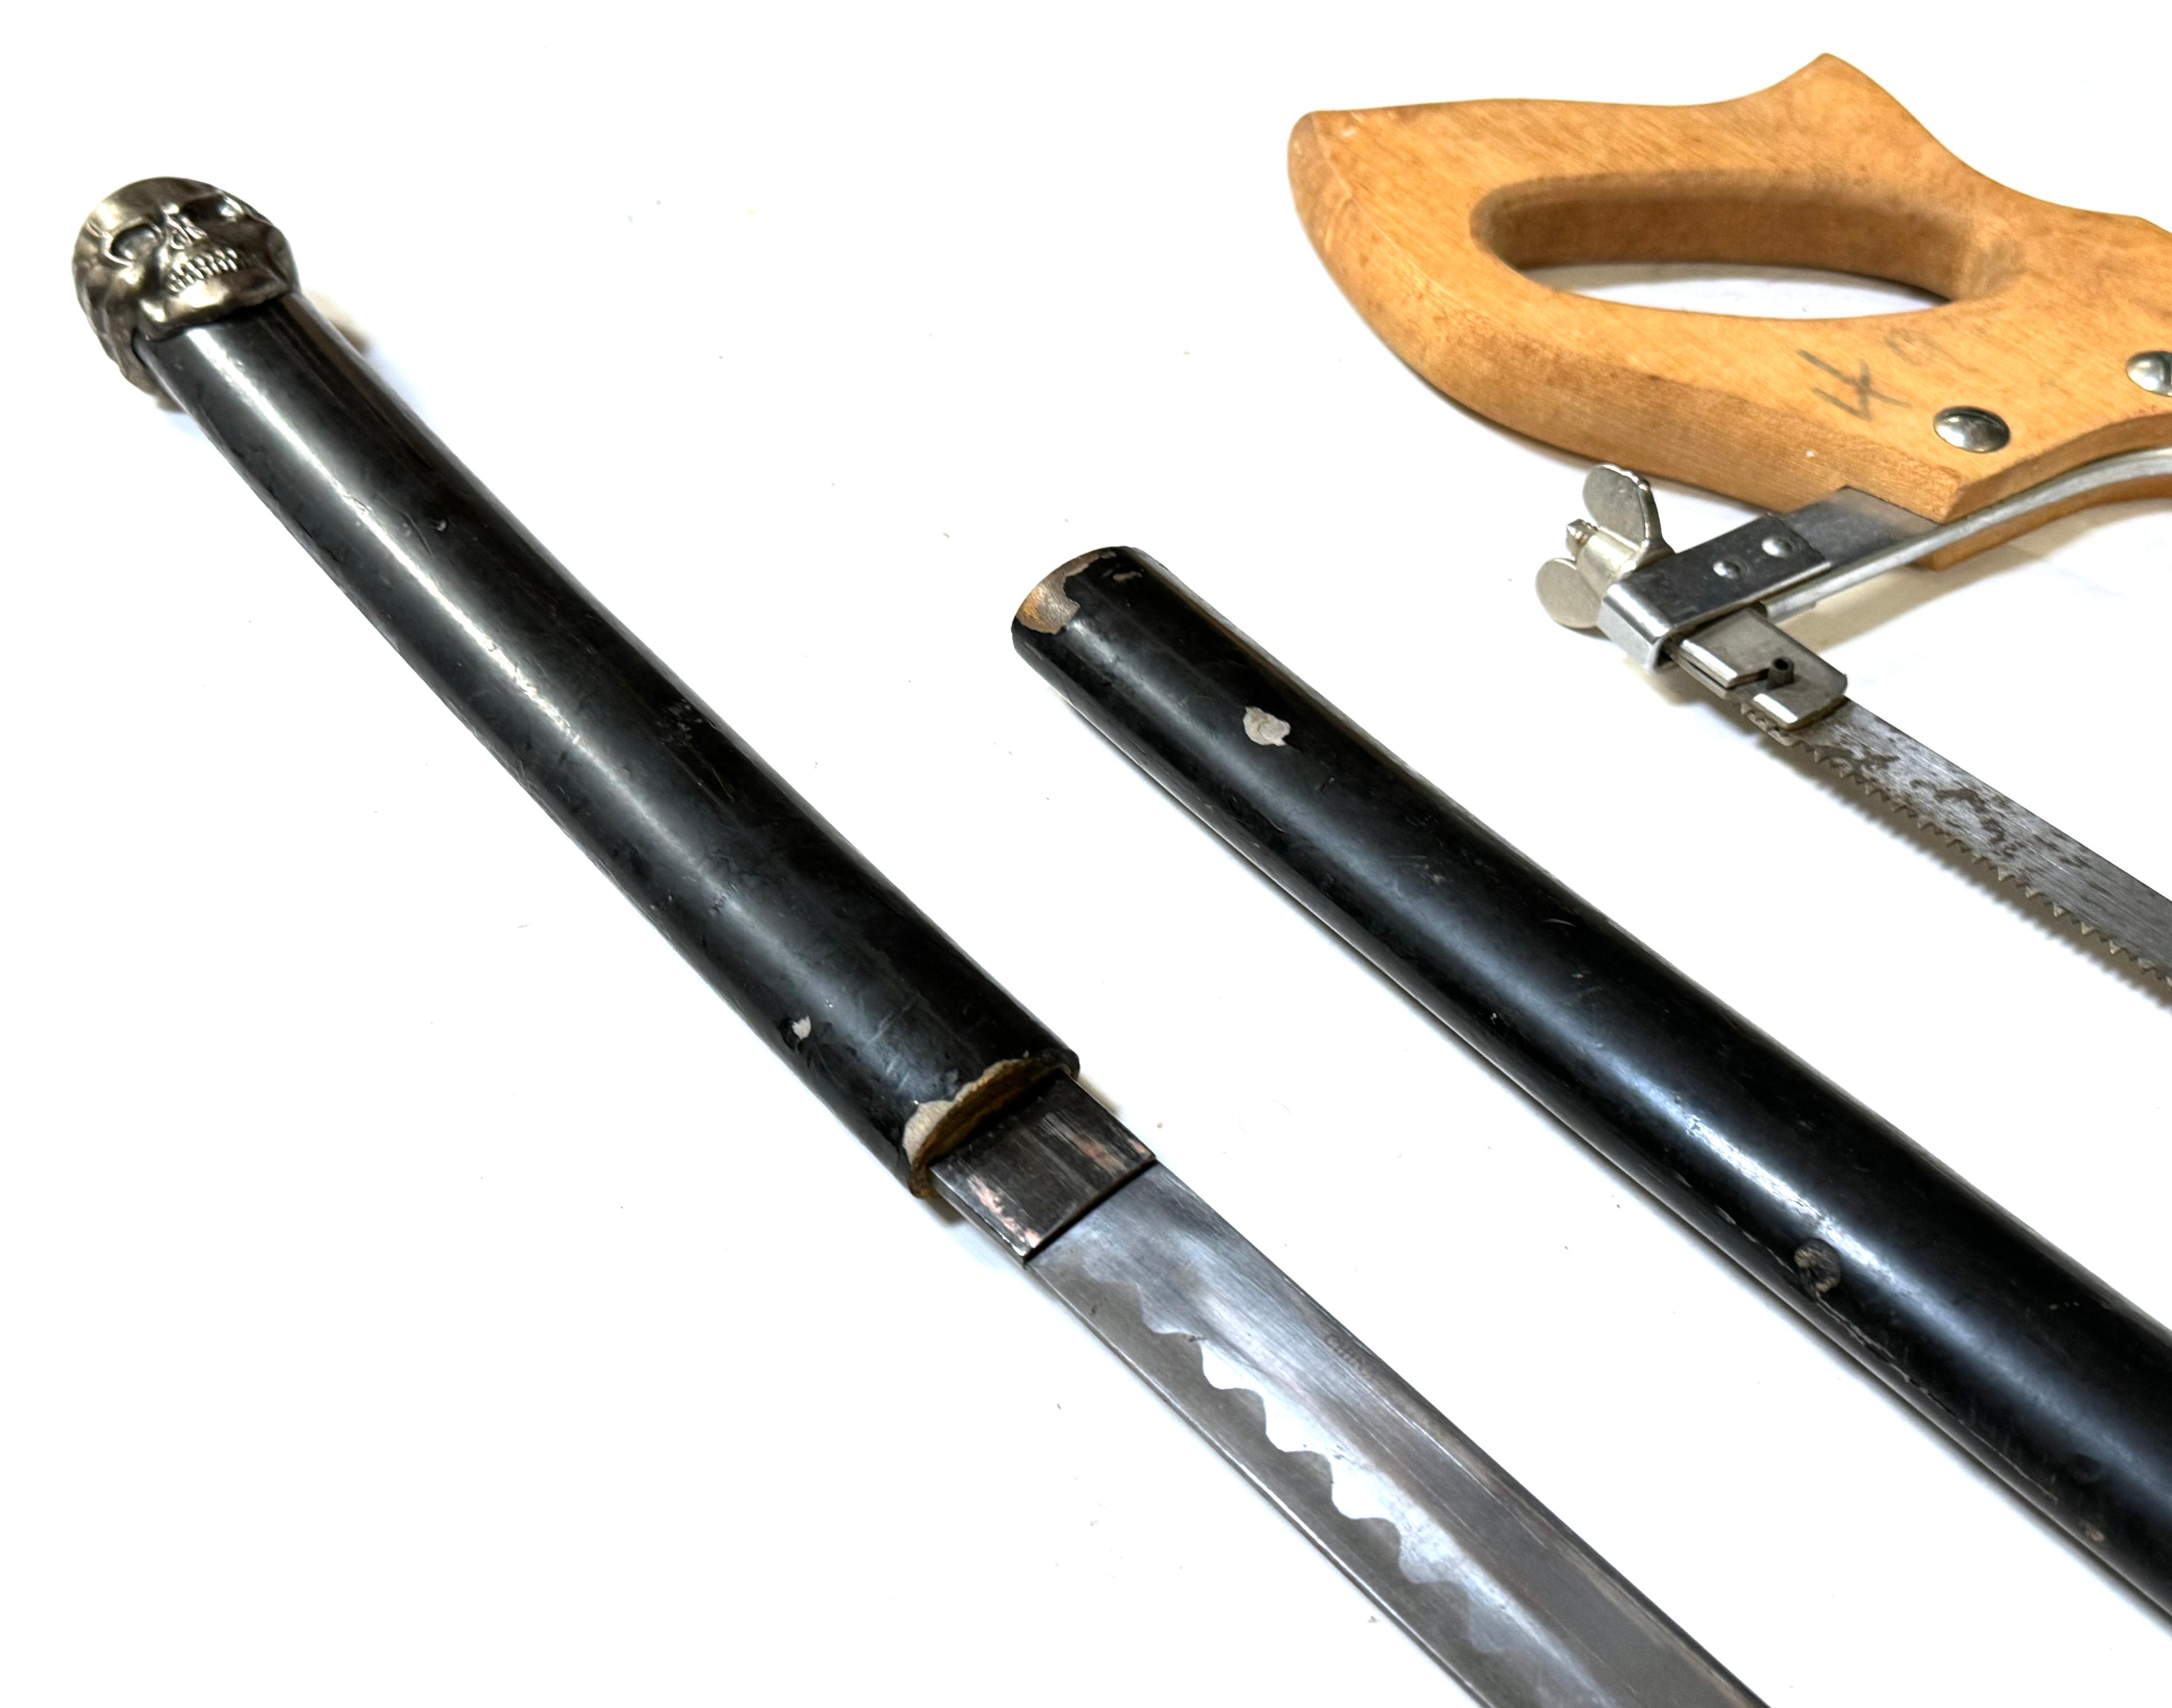 Japanese-Style Katana, Trapmaster 1100 CO2-Powered Shotgun, and Hand Saw *LOCAL PICKUP ONLY*